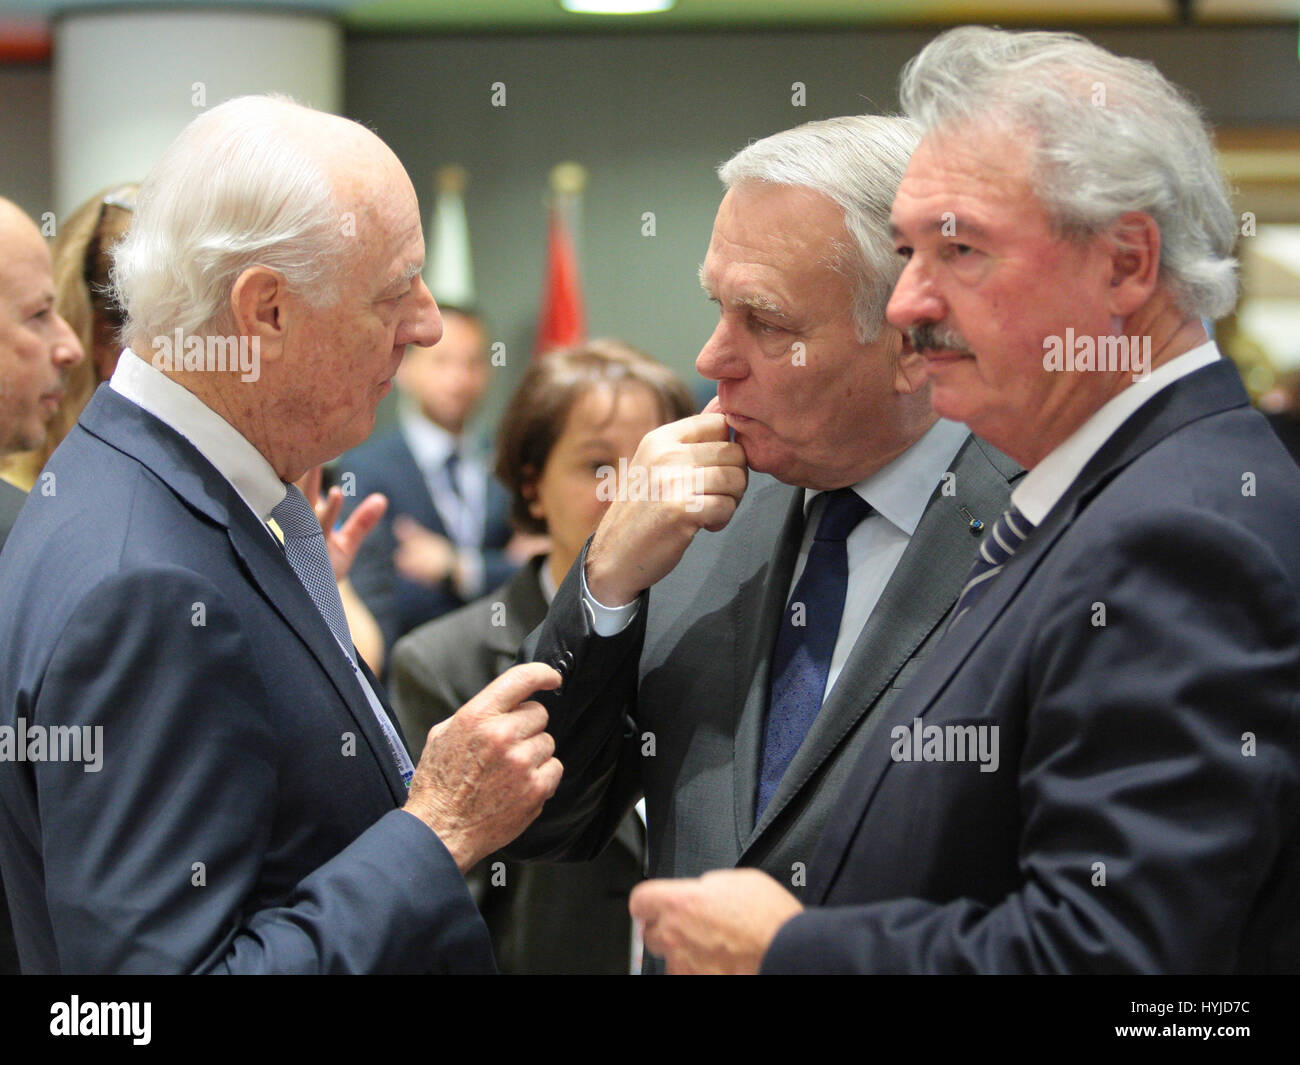 Brussels, Belgium. 05th Apr, 2017. Roundtable of Ministers, Ambassadors and State Secretary in support of Syria and the region, United Nations Special Envoy for Syria Stefan de Mistura And France Mibnister for Foreign Affairs Jean-Marc Ayrault. Credit: Leo Cavallo/Alamy Live News Stock Photo